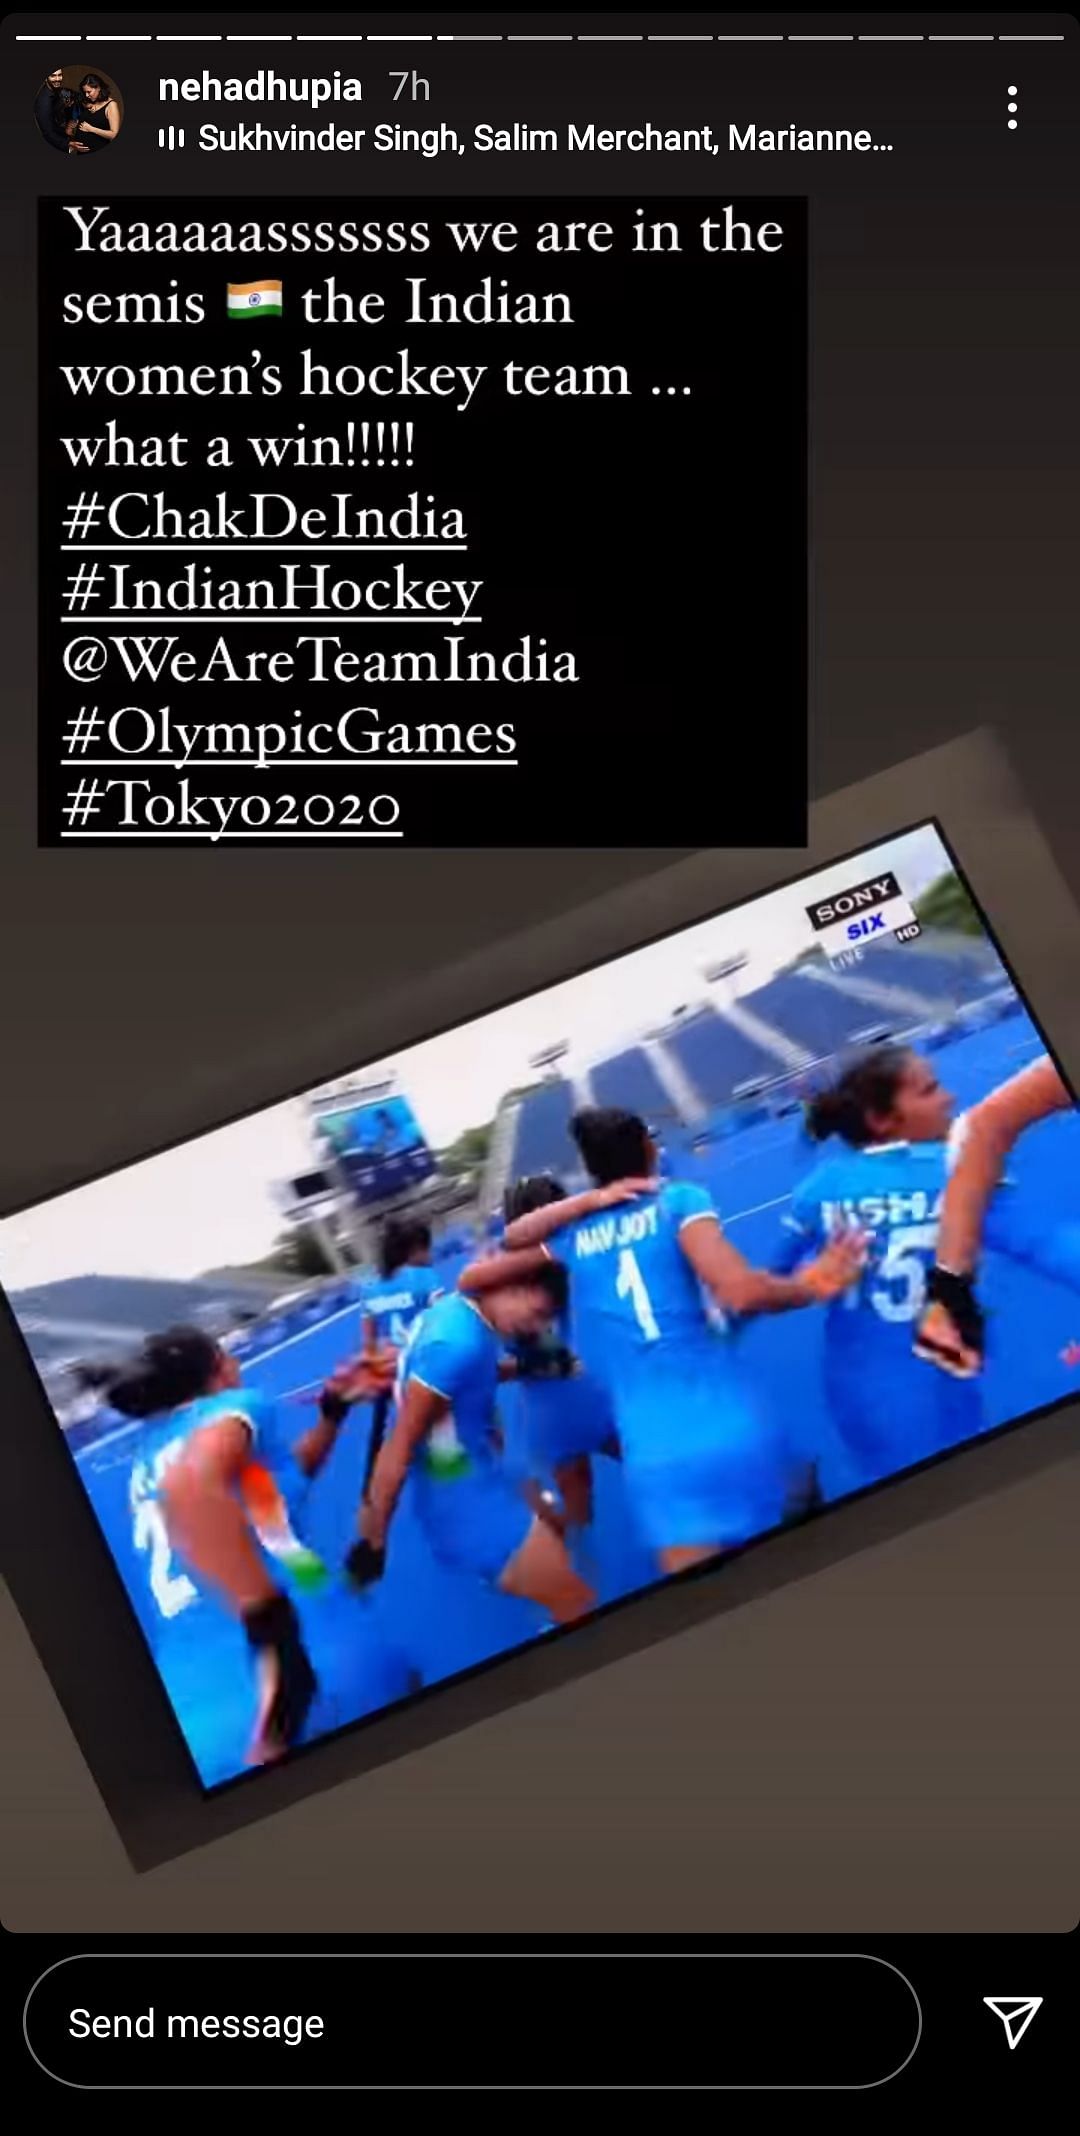 Taapsee Pannu, Arjun Kapoor, Samantha Prabhu also congratulated PV Sindhu and the Indian women's hockey team.